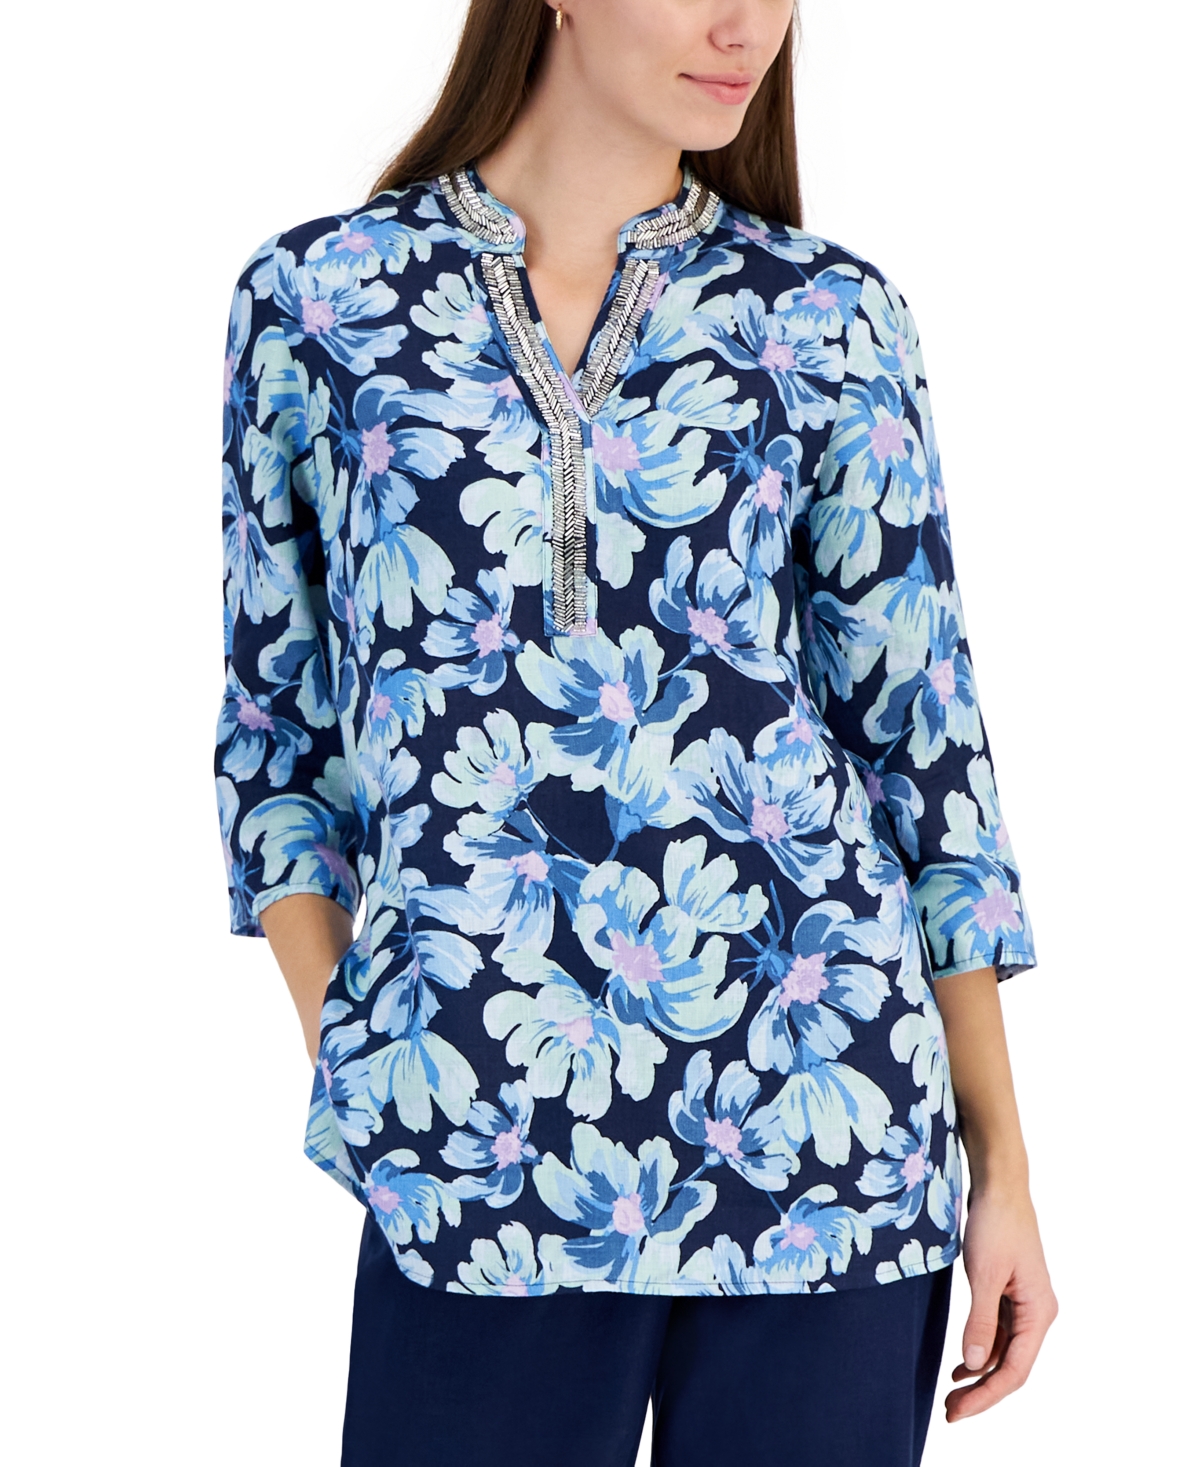 Women's 100% Linen Morning Bloom Tunic, Created for Macy's - Intrepid Blue Combo